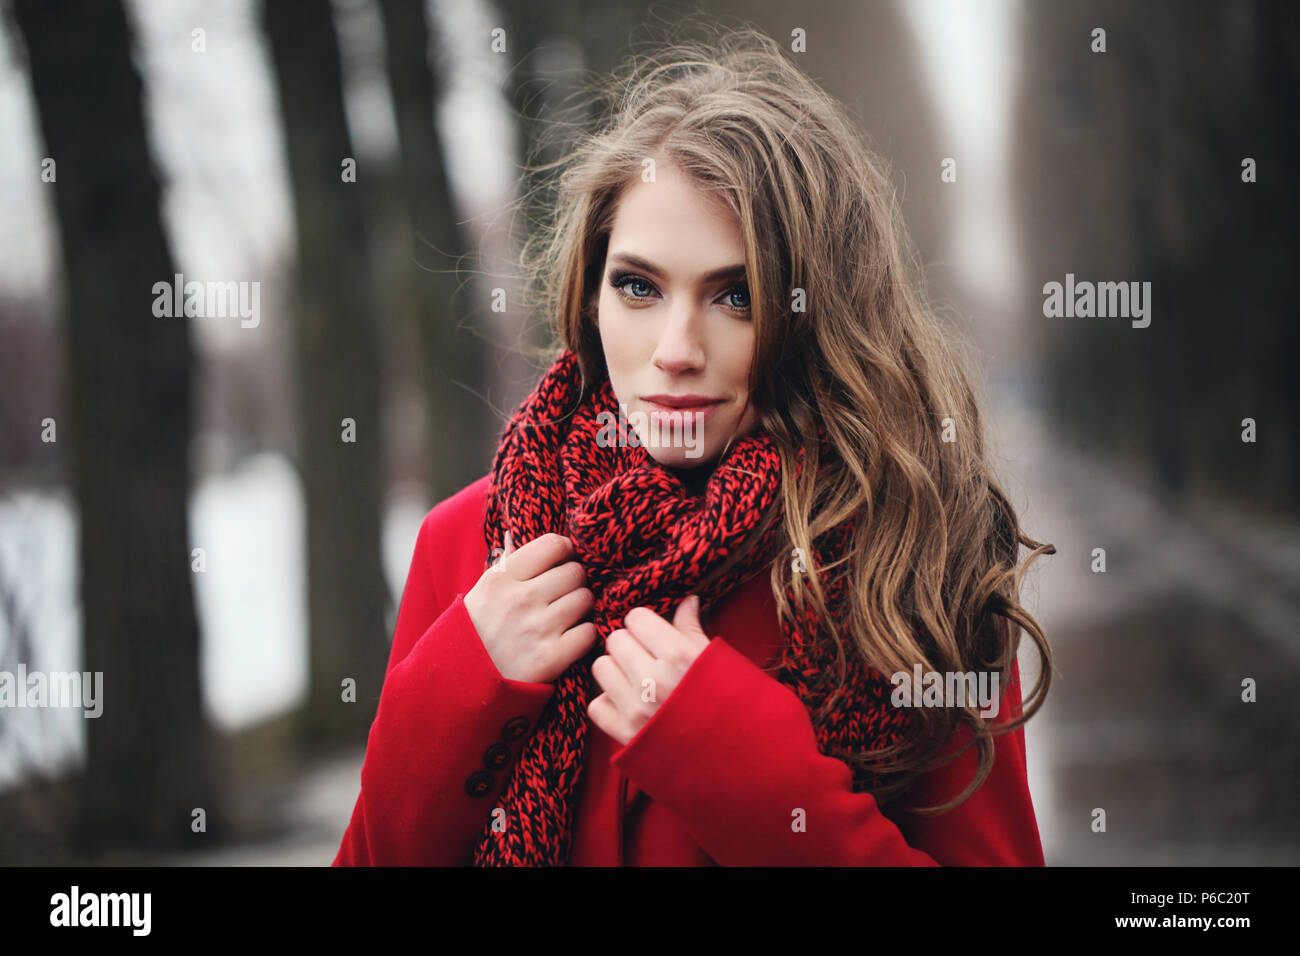 Smiling woman in red scarf walking in park. Perfect female face closeup Stock Photo